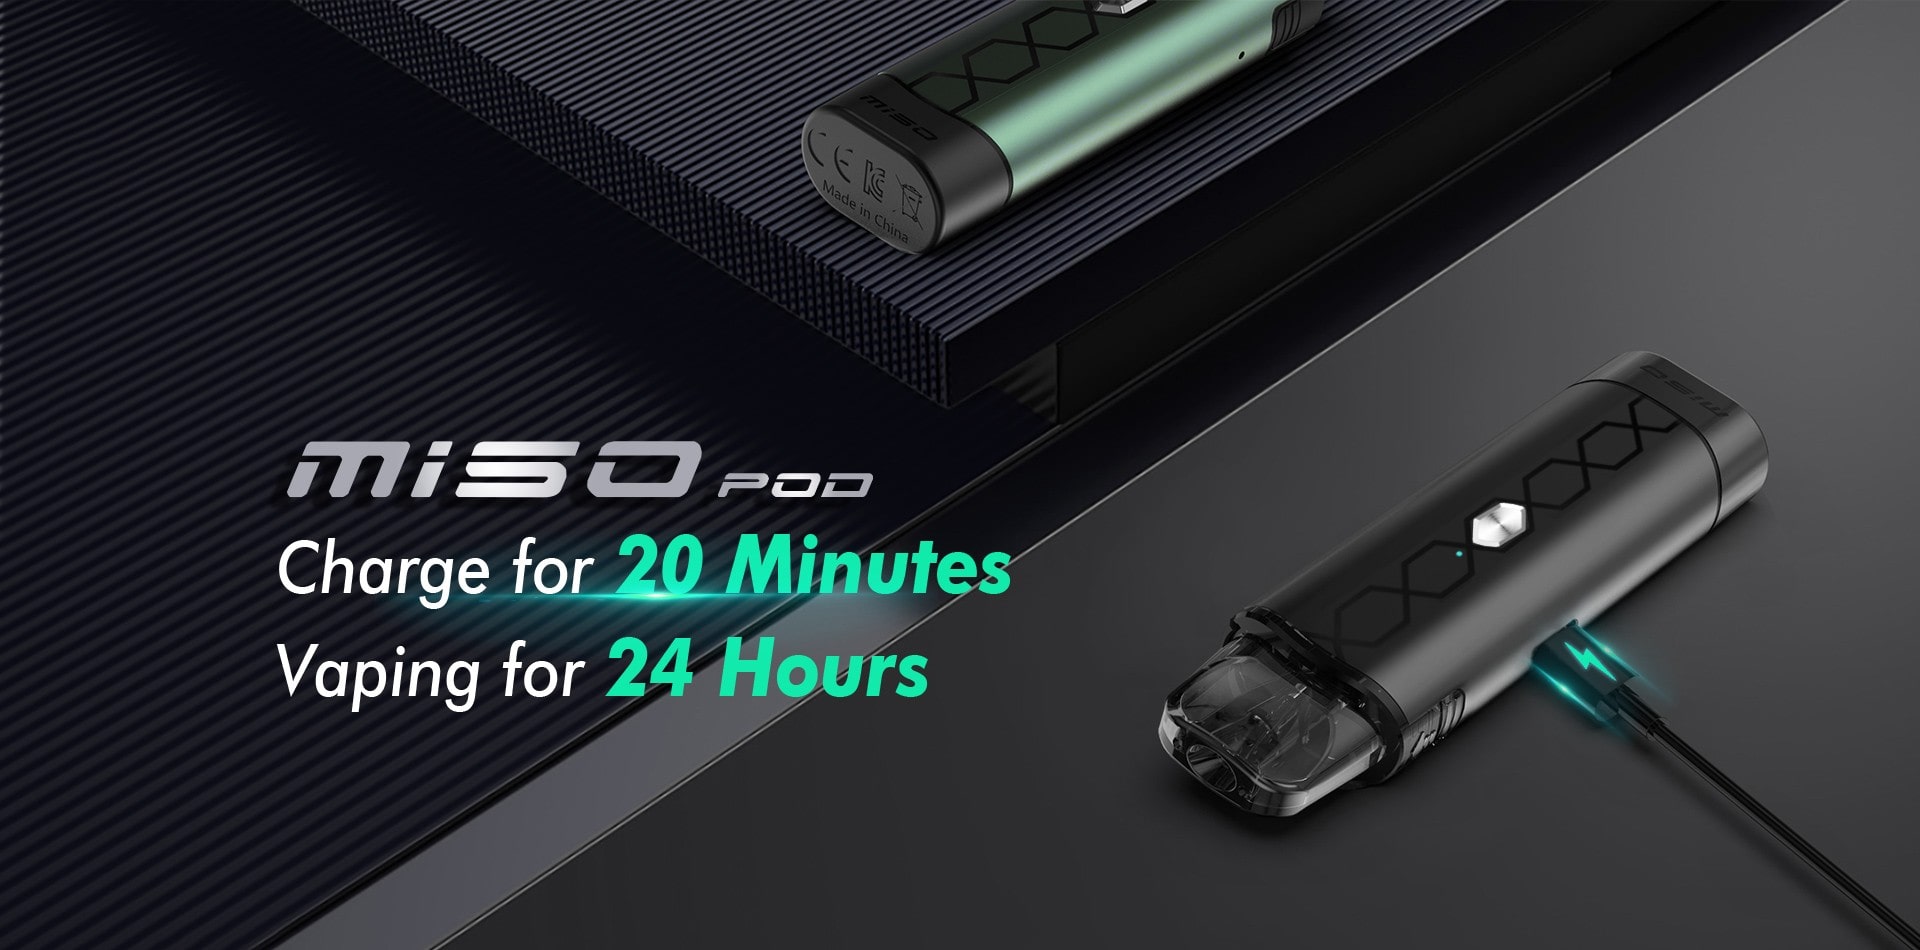 miso - mordern design, stylish color - Style meets convenience. Pocketable meets efficiency.  With 20 minutes flash charge and  interchangeable airflow, the new Miso is going to bring  you a new vaping experience.-6